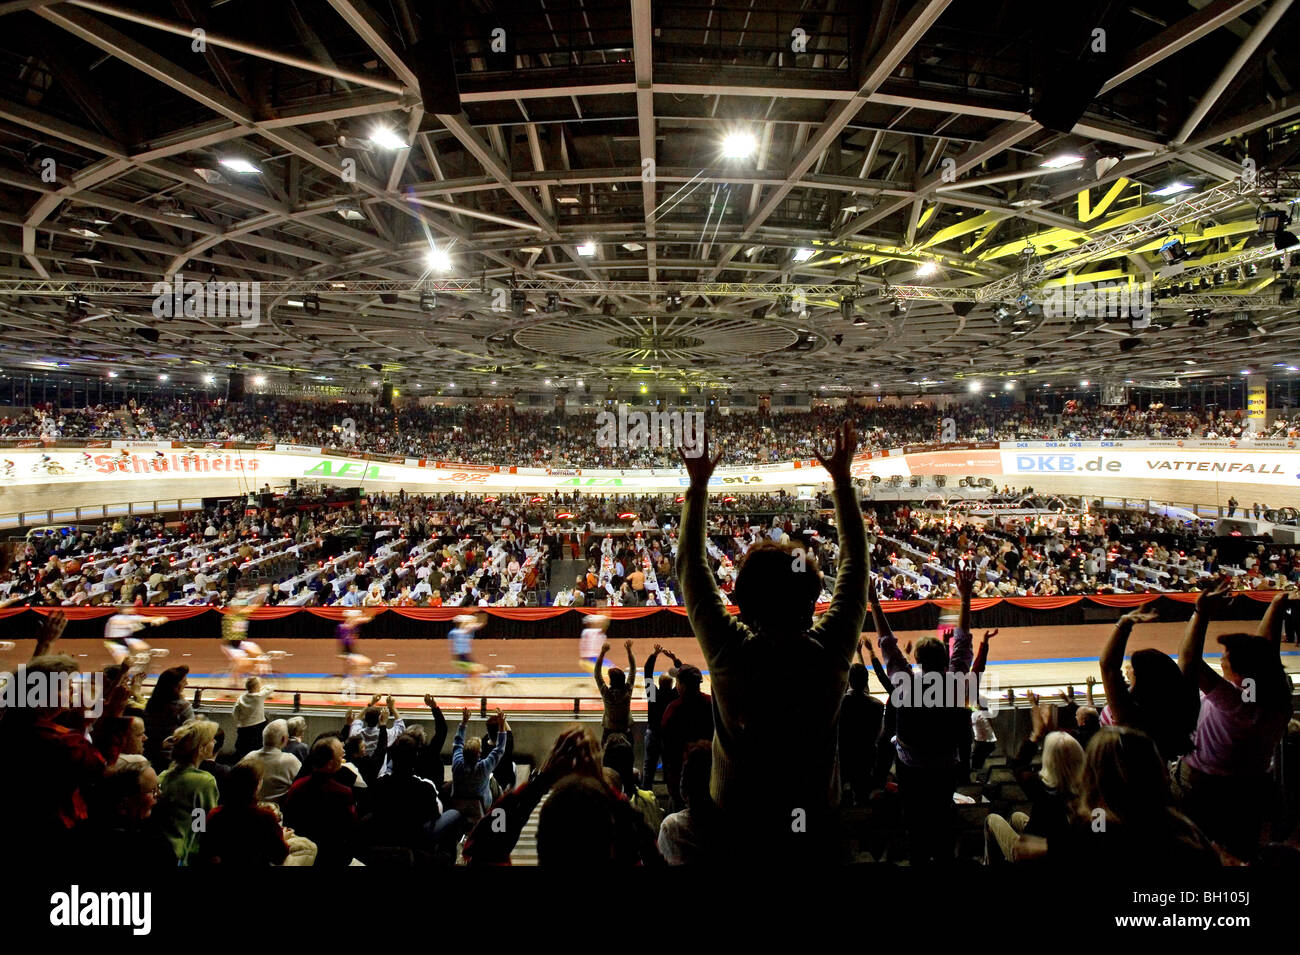 Interior view of the Velodrome during the six day race, Berlin, Germany, Europe Stock Photo